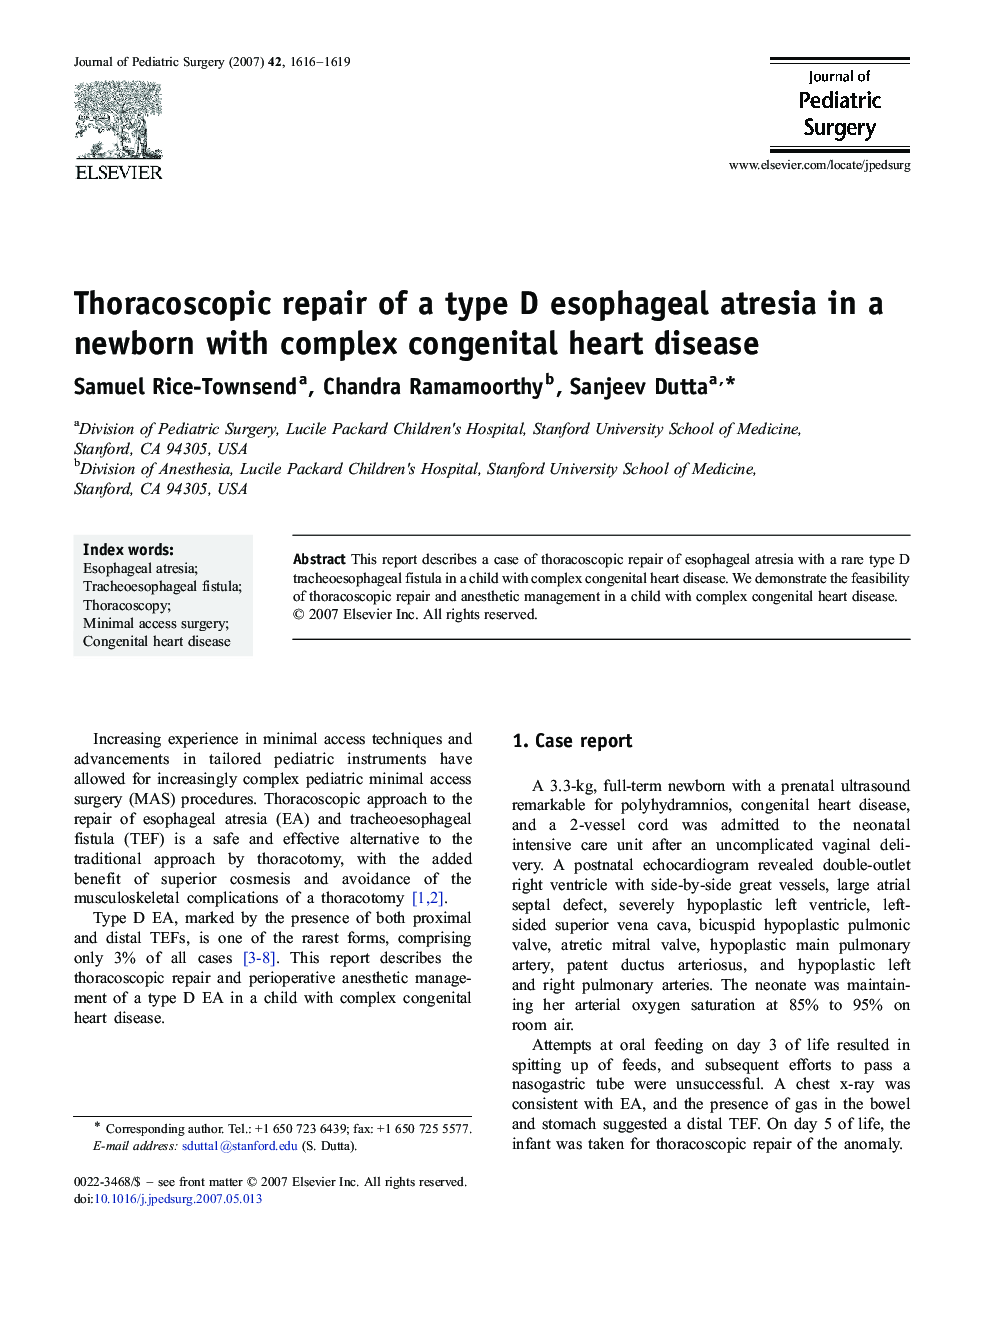 Thoracoscopic repair of a type D esophageal atresia in a newborn with complex congenital heart disease